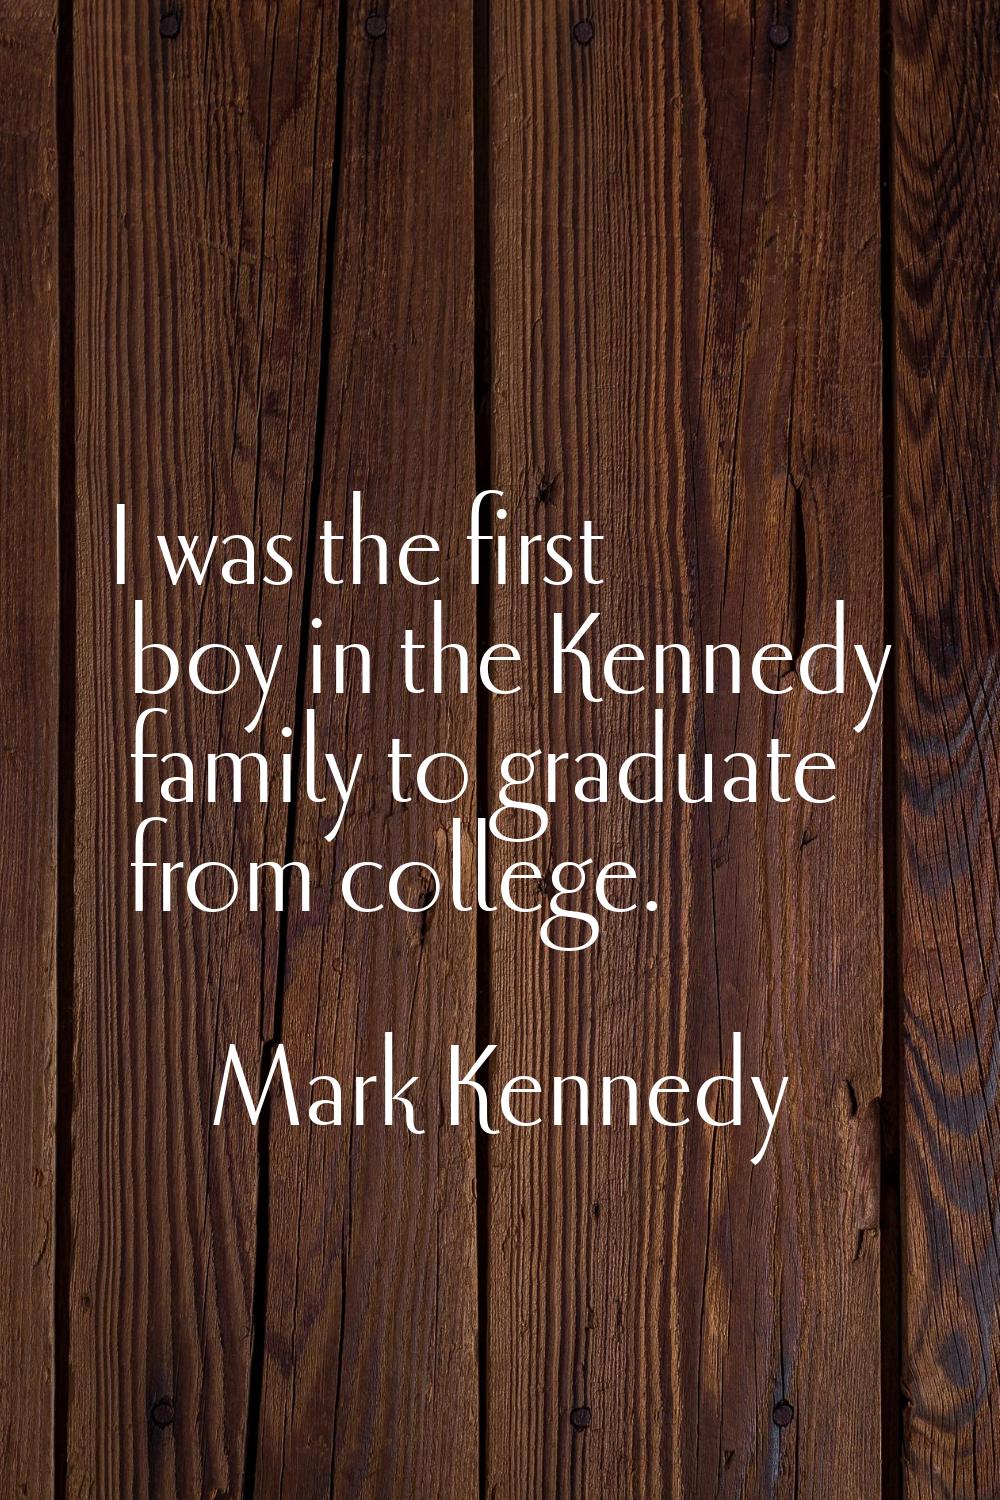 I was the first boy in the Kennedy family to graduate from college.